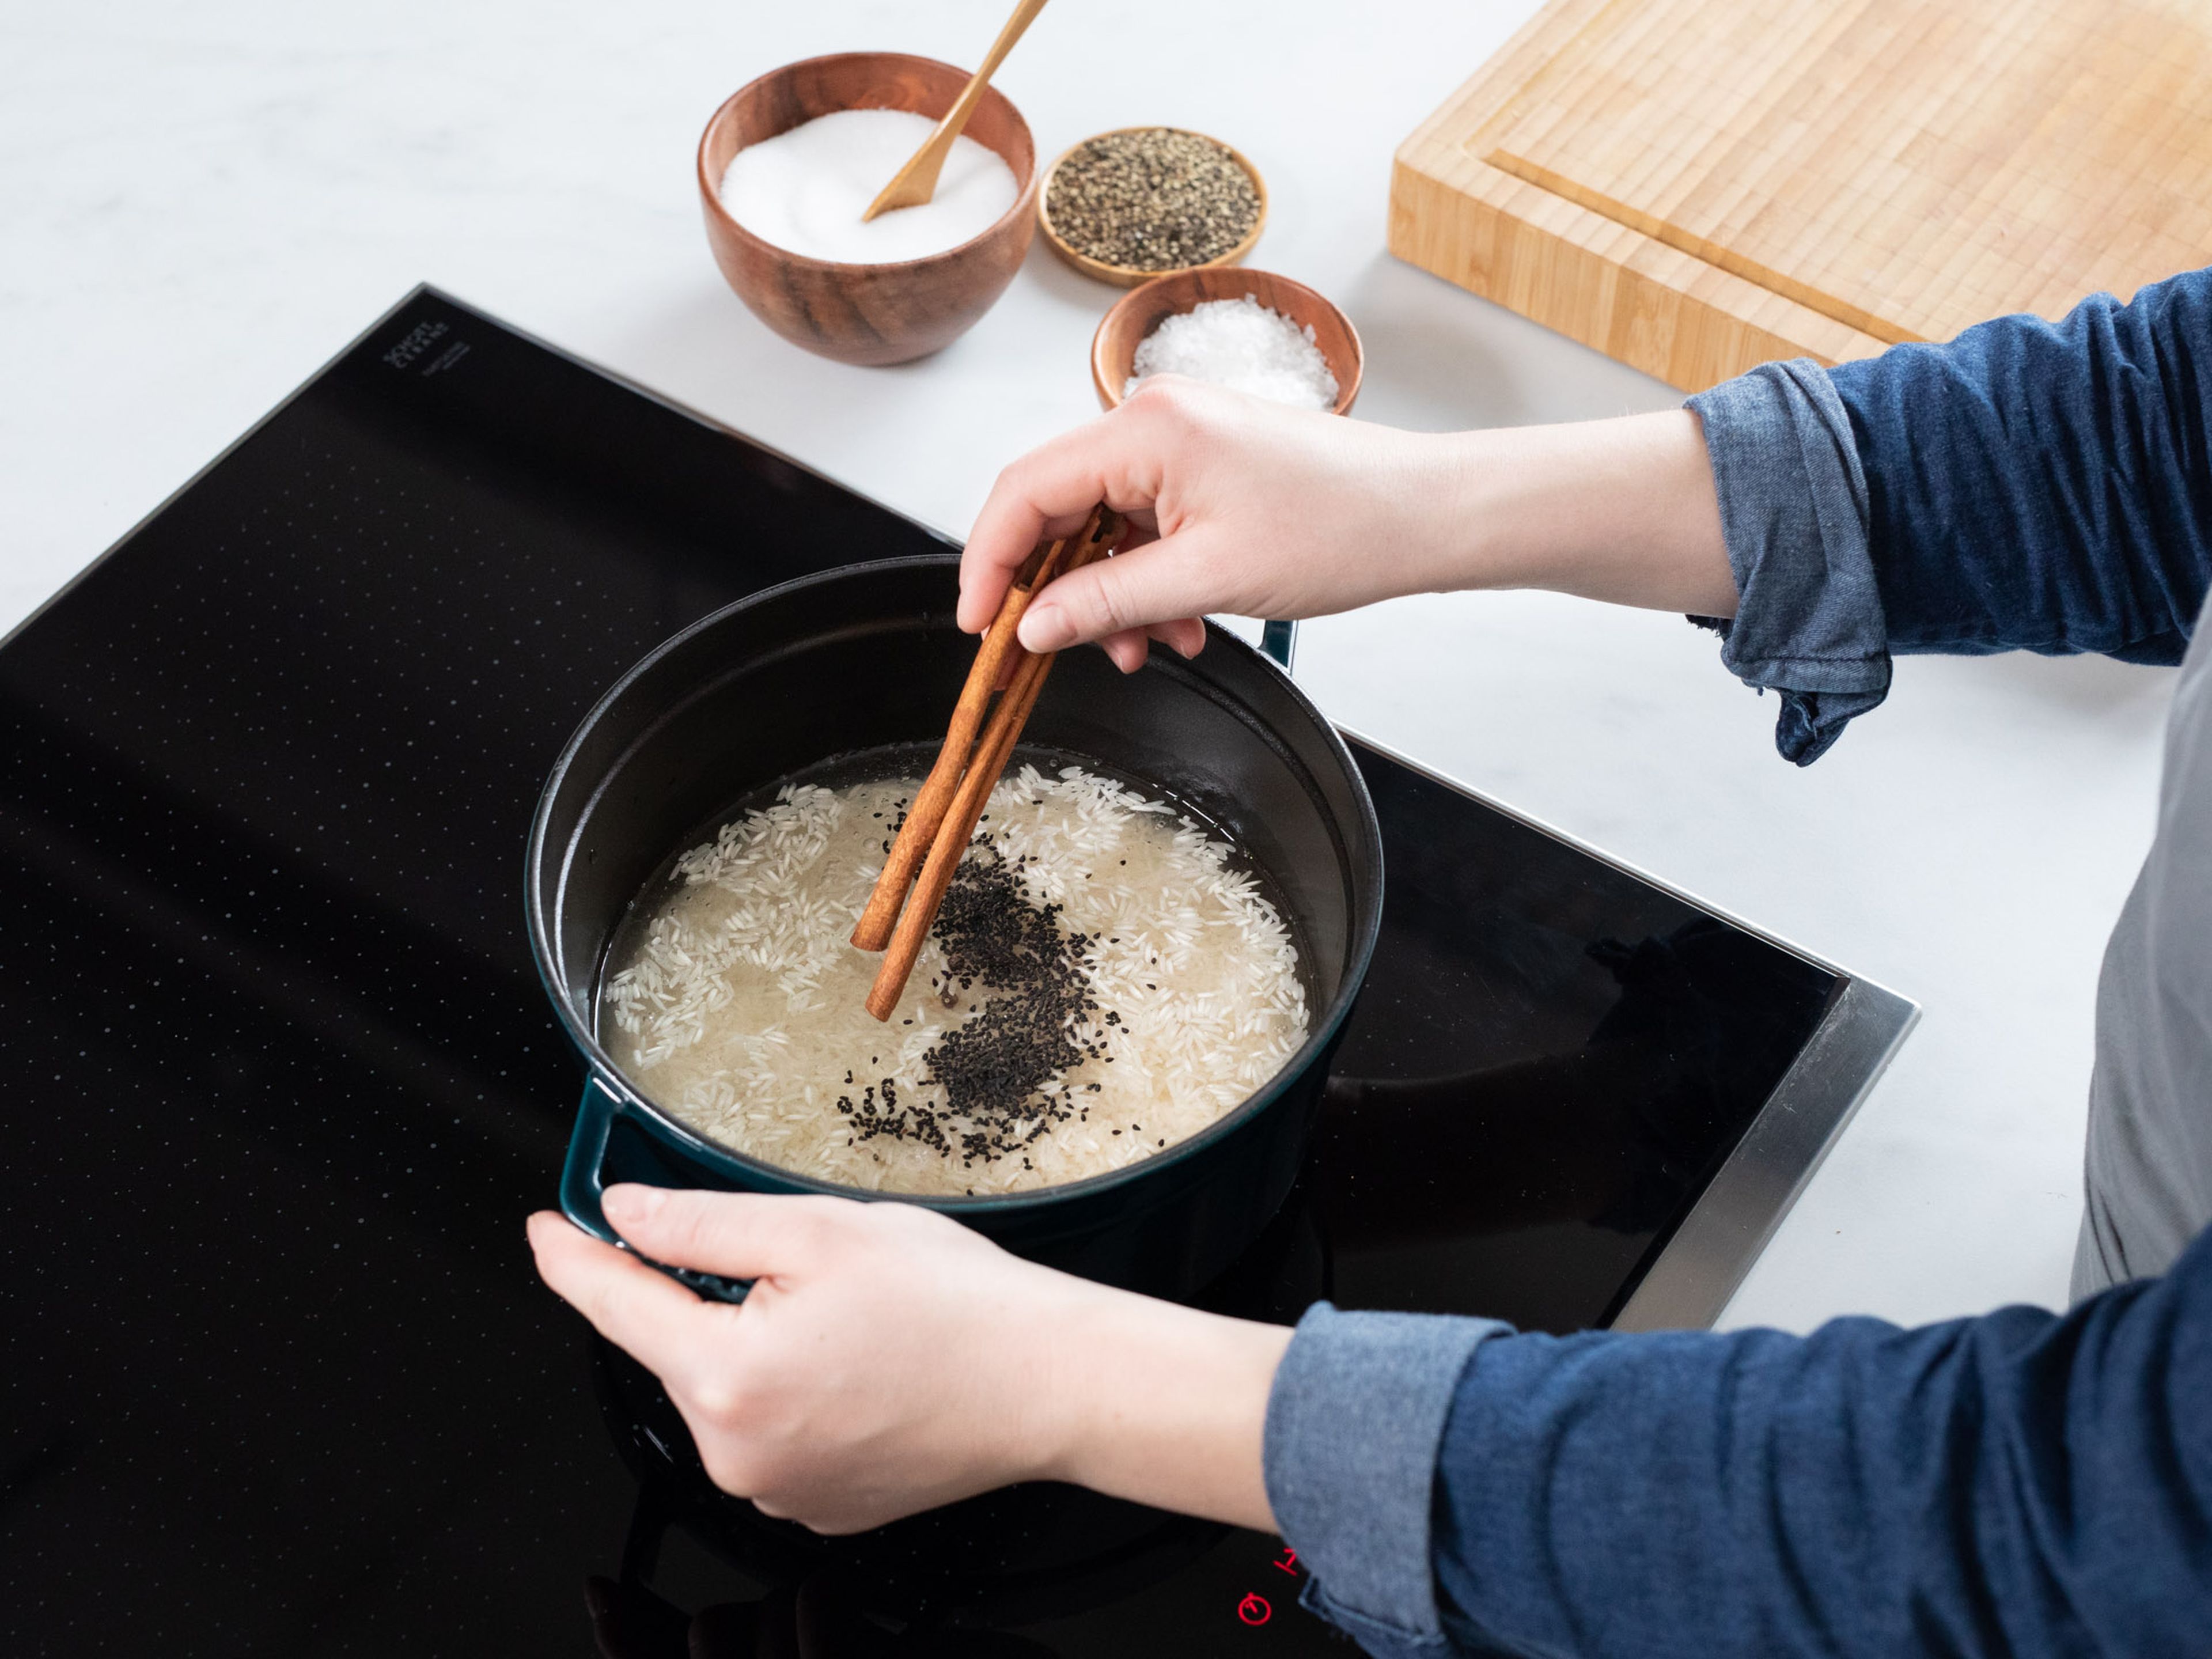 Add rice to another pot along with water, black cumin, cinnamon, salt and pepper. Bring to a boil, reduce heat to low, place a lid on, and cook for 5 min. Drain the rice and spread it out, so it doesn’t stick. The rise should not be cooked through at this point.